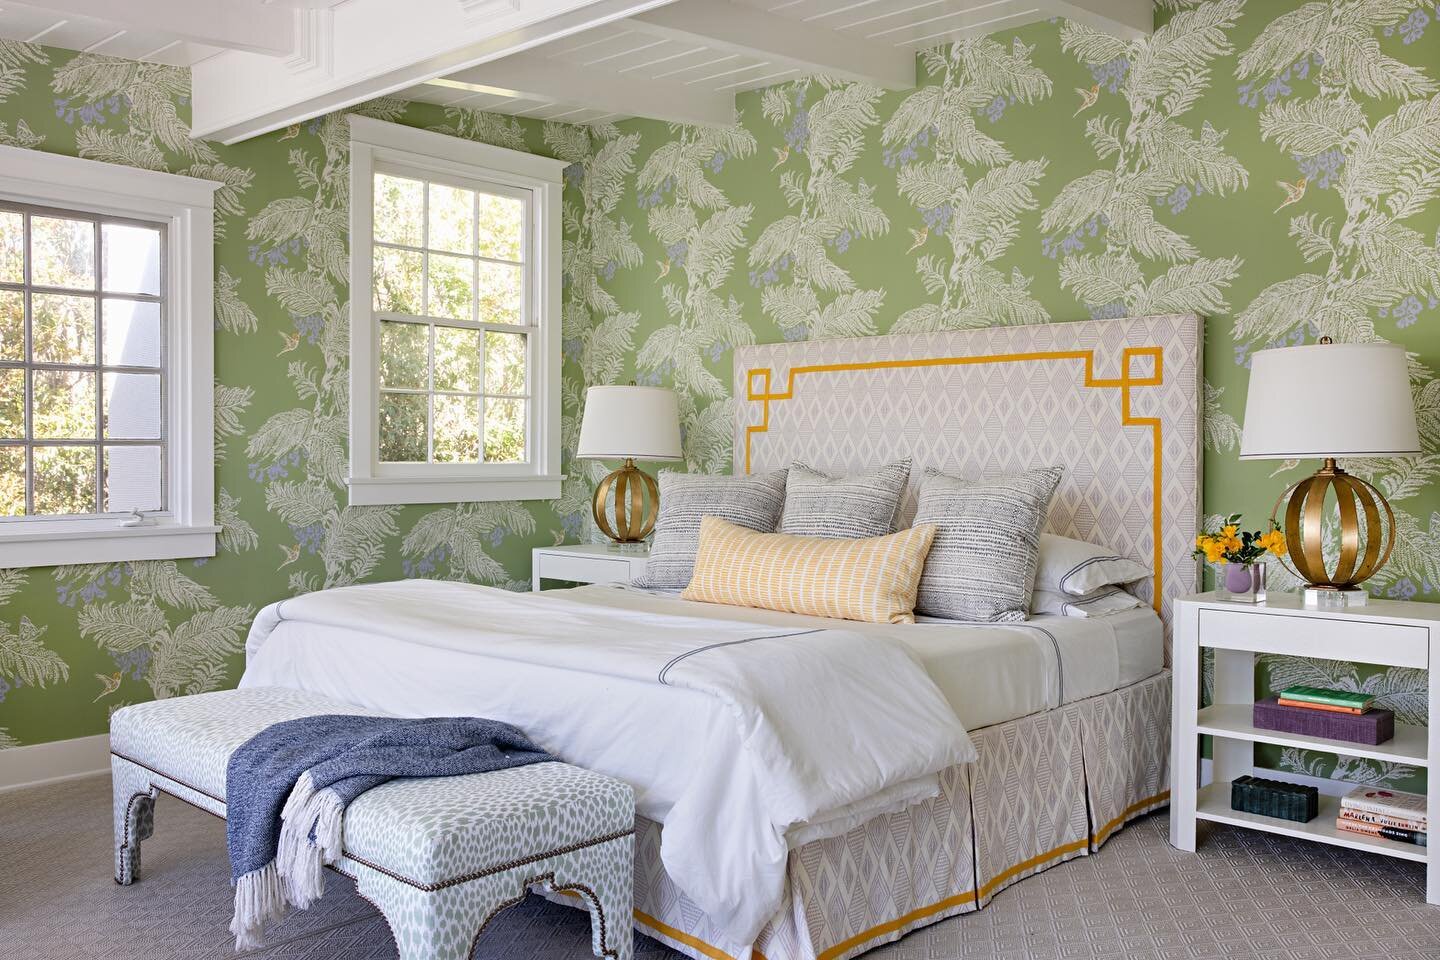 Melissa was all prepped for the presentation of this Primary Bedroom but when she saw this @lakeaugust wallpaper go up at @hollywoodathome she just knew it was &ldquo;the one&rdquo; and had to do a new scheme around it.  And voila - it was worth it! 